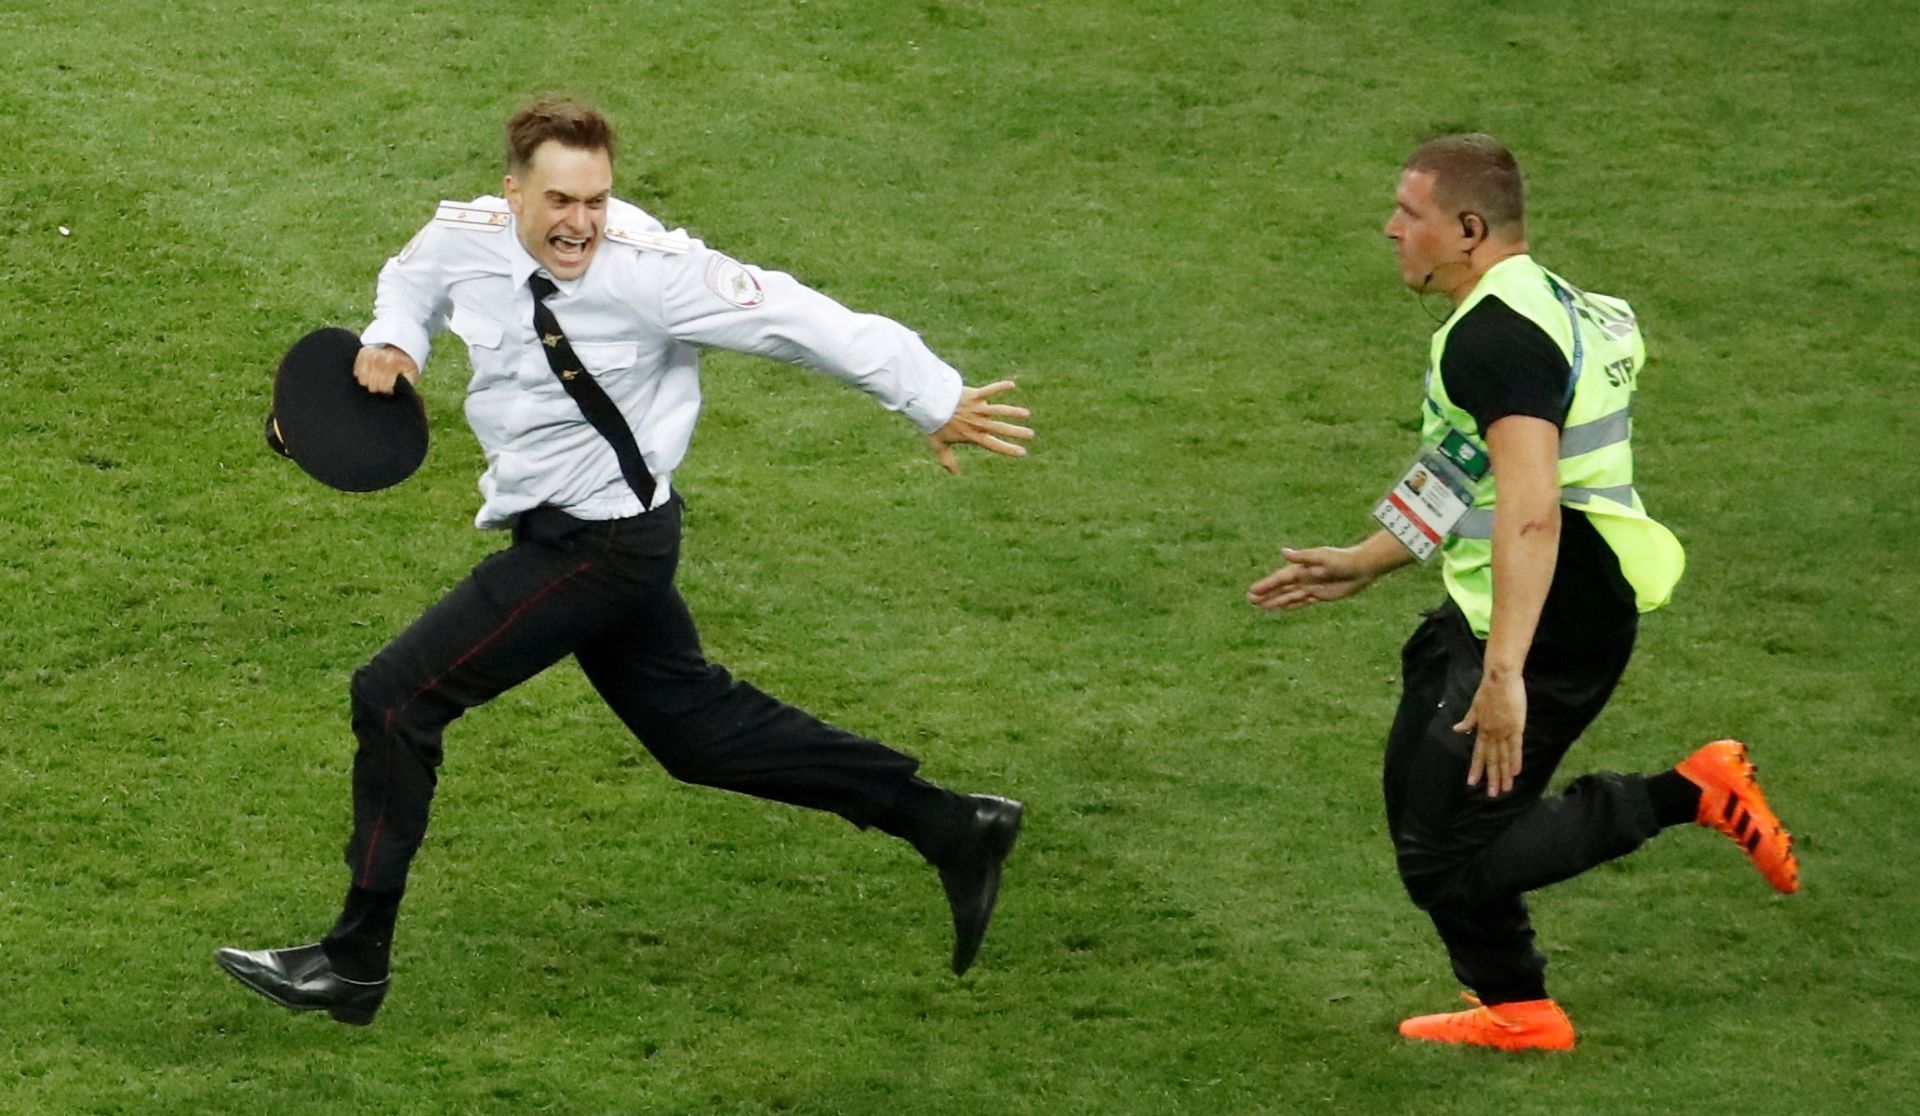 FILE PHOTO: World Cup - Final - France v Croatia FILE PHOTO: Soccer Football - World Cup - Final - France v Croatia - Luzhniki Stadium, Moscow, Russia - July 15, 2018  Pitch invader Pyotr Verzilov is chased by a steward during the match   REUTERS/Christian Hartmann/File Photo Christian Hartmann